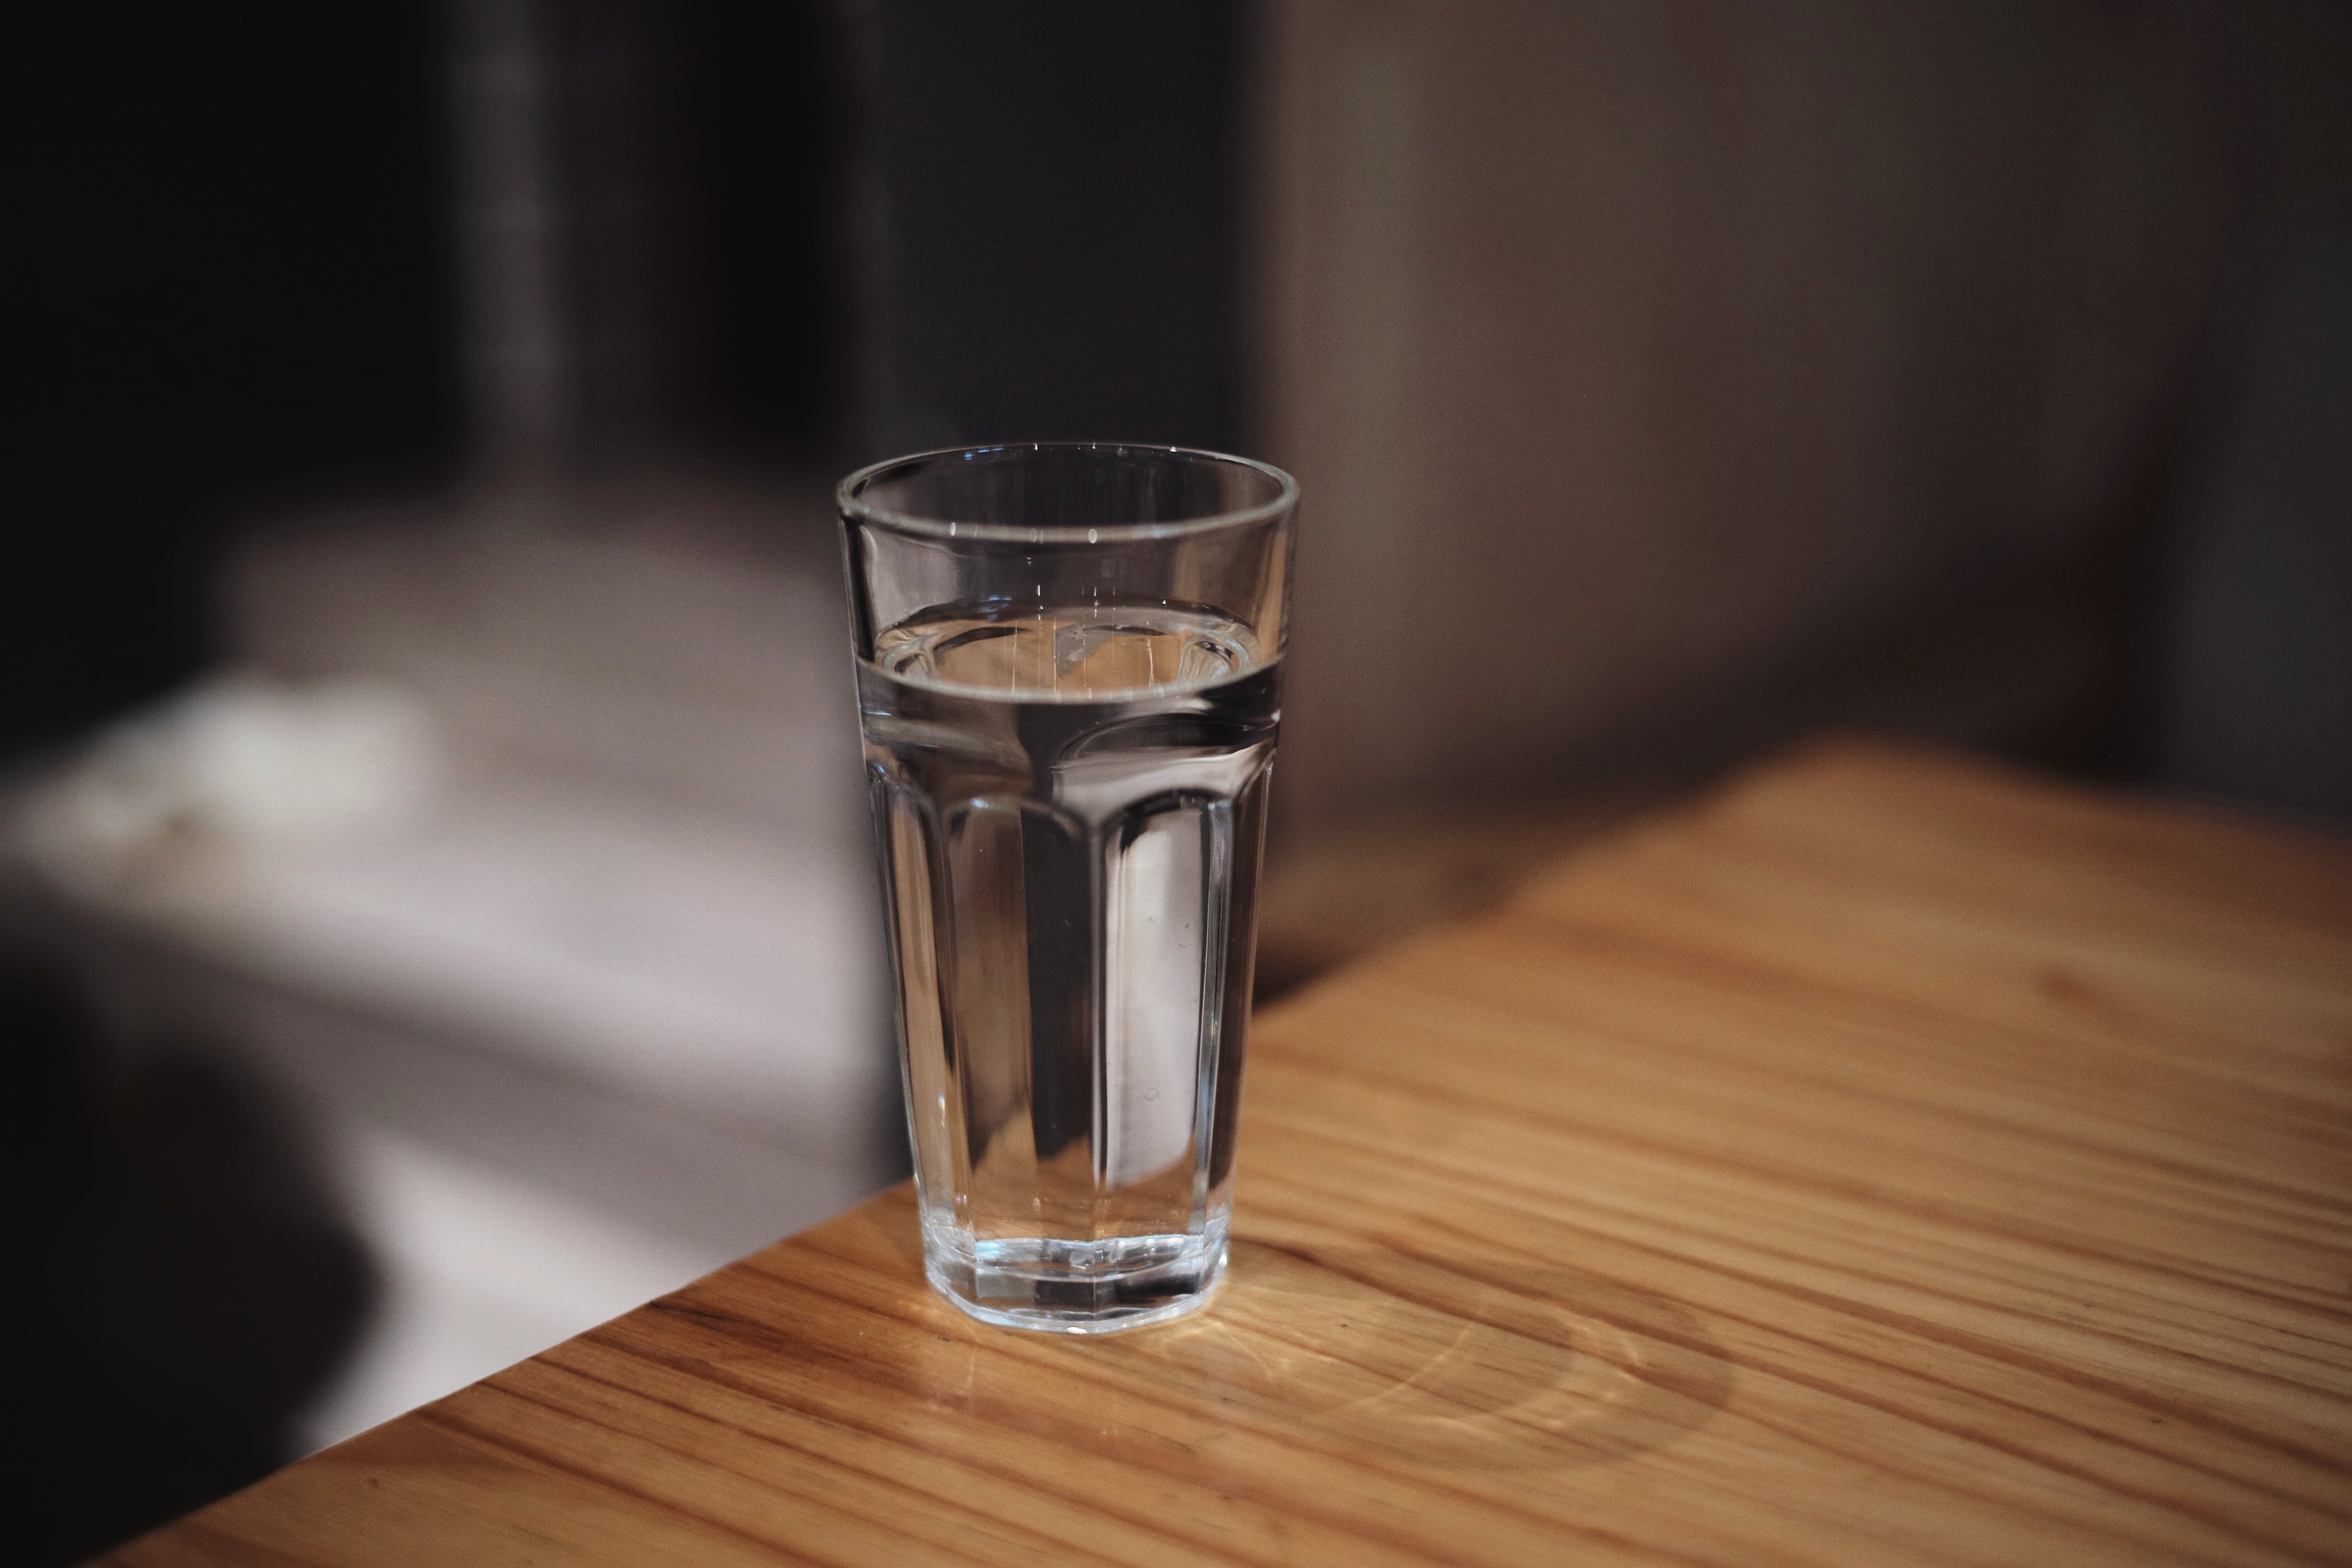 A glass of water on the edge of a table.